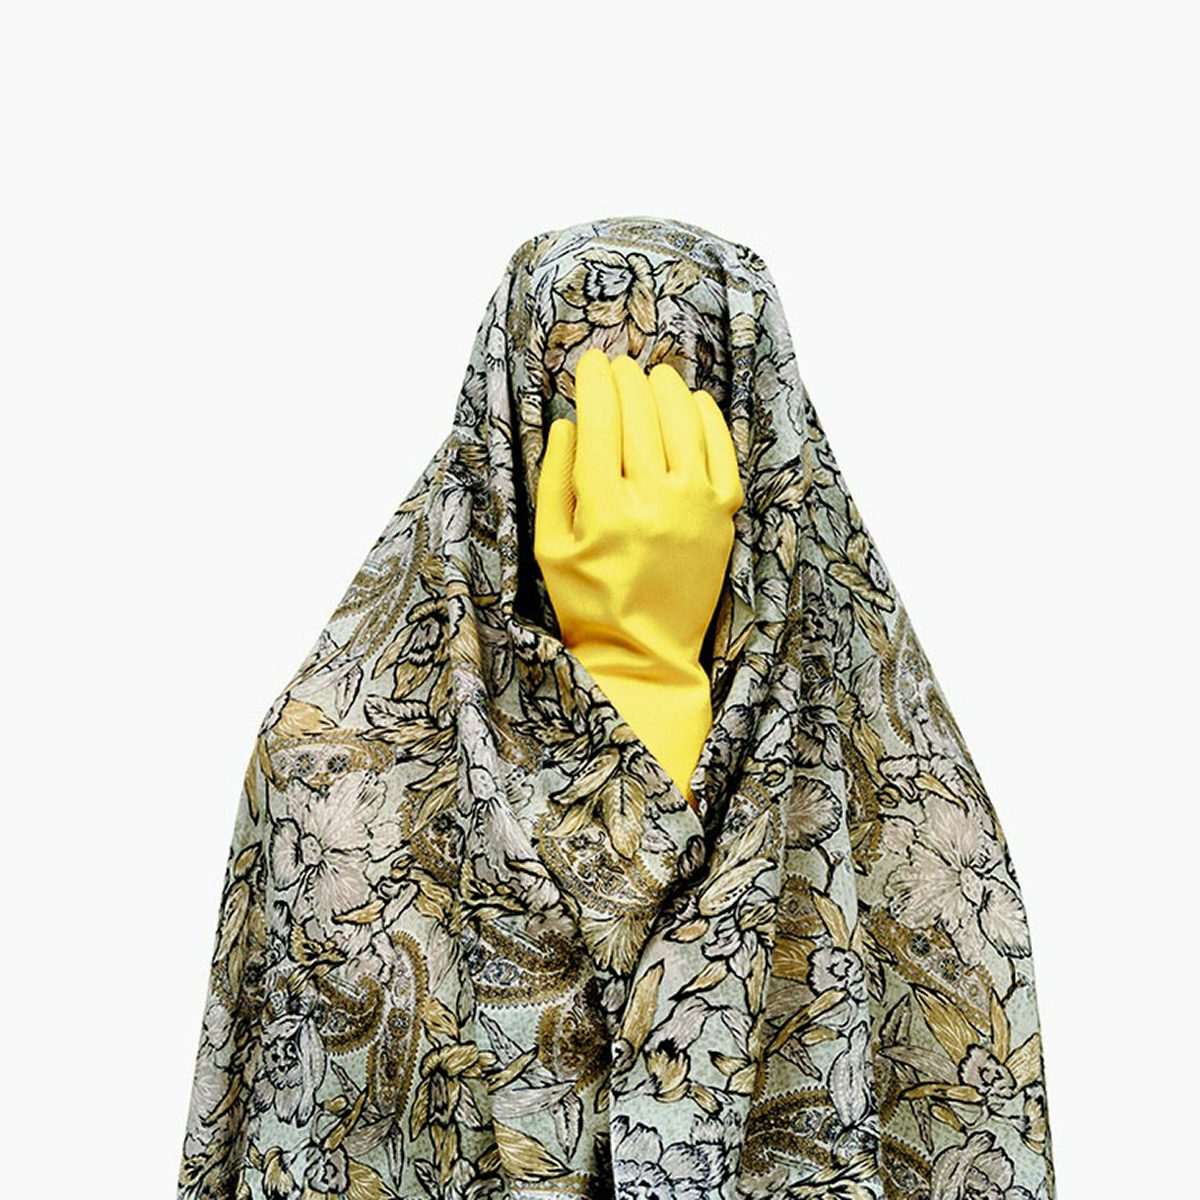 Photograph by Shadi Ghadirian showing a person wearing a floral veil, their face covered by a yellow rubber glove